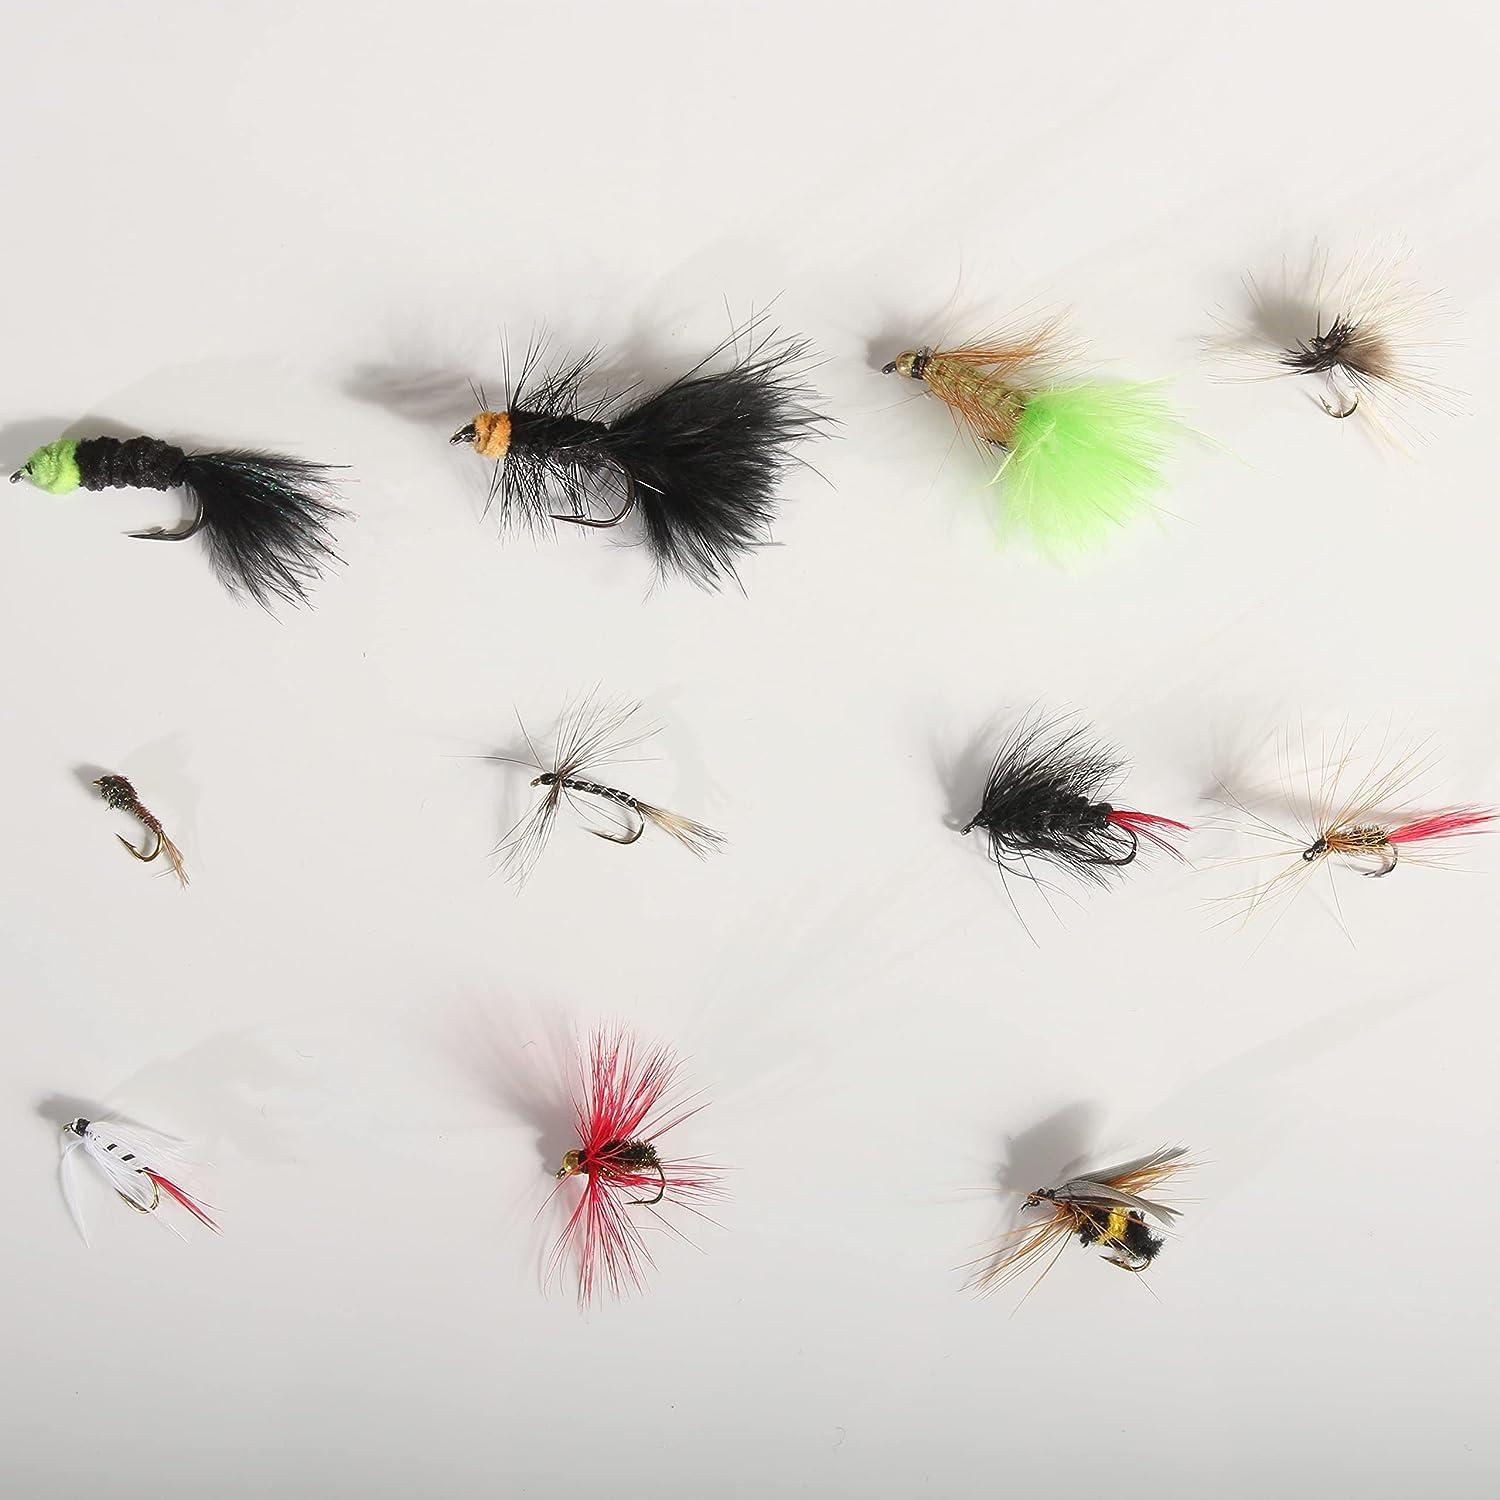 ZIQIDONGLAI Dry Fly Fishing Lure Kit Fly Fishing Gear for Bass, Trout,  Salmon with Organizer Box 40Pcs Flies Fly Fishing Dry/Wet Fly Fishing Lures  (Color : Multi-colored, Size : 10.5x6.5x3.6cm) : 